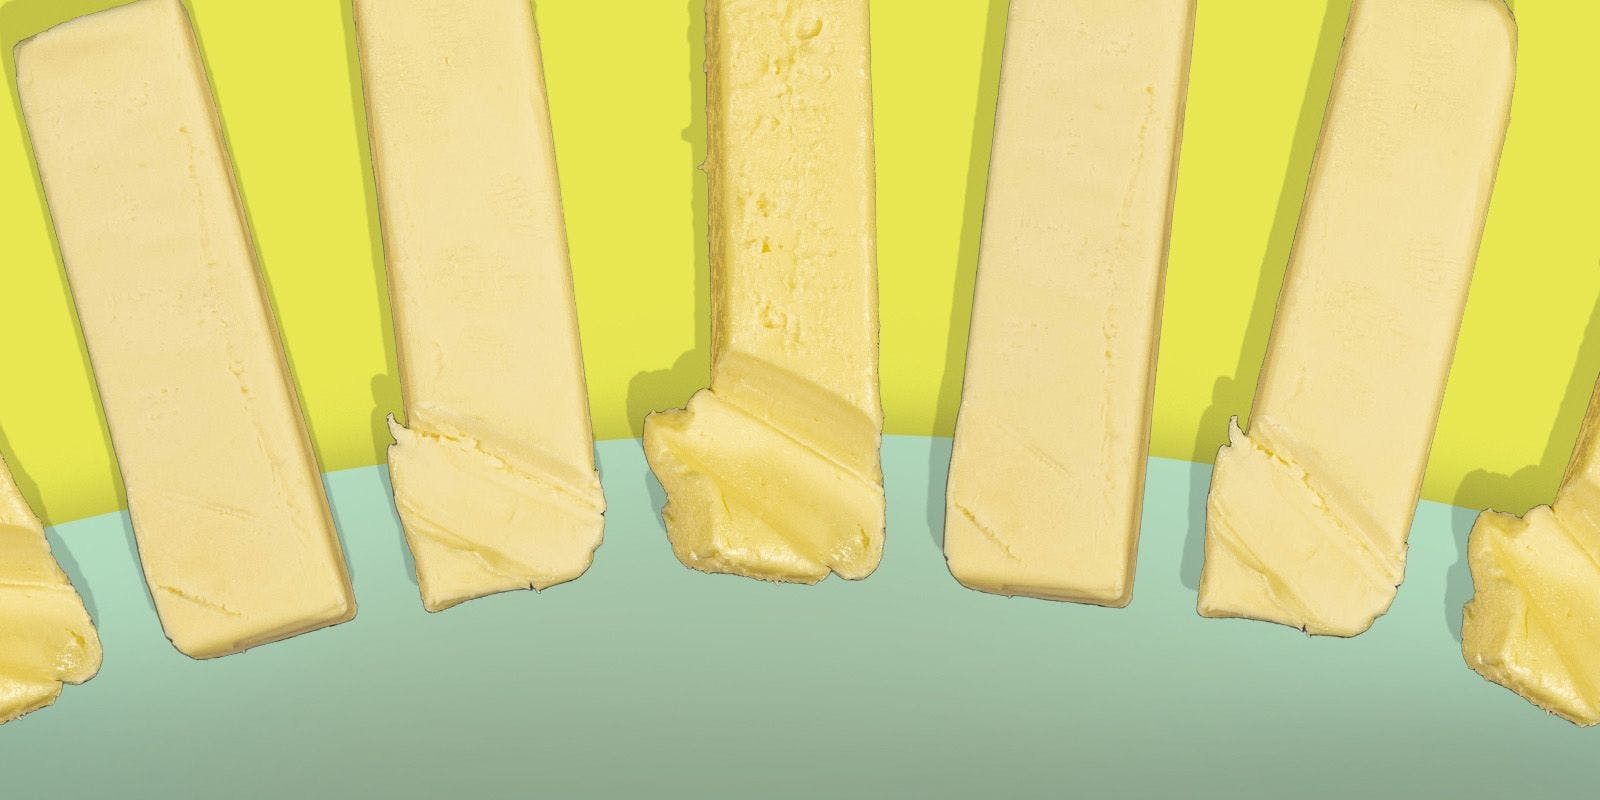 A design showing the stages of butter softness.